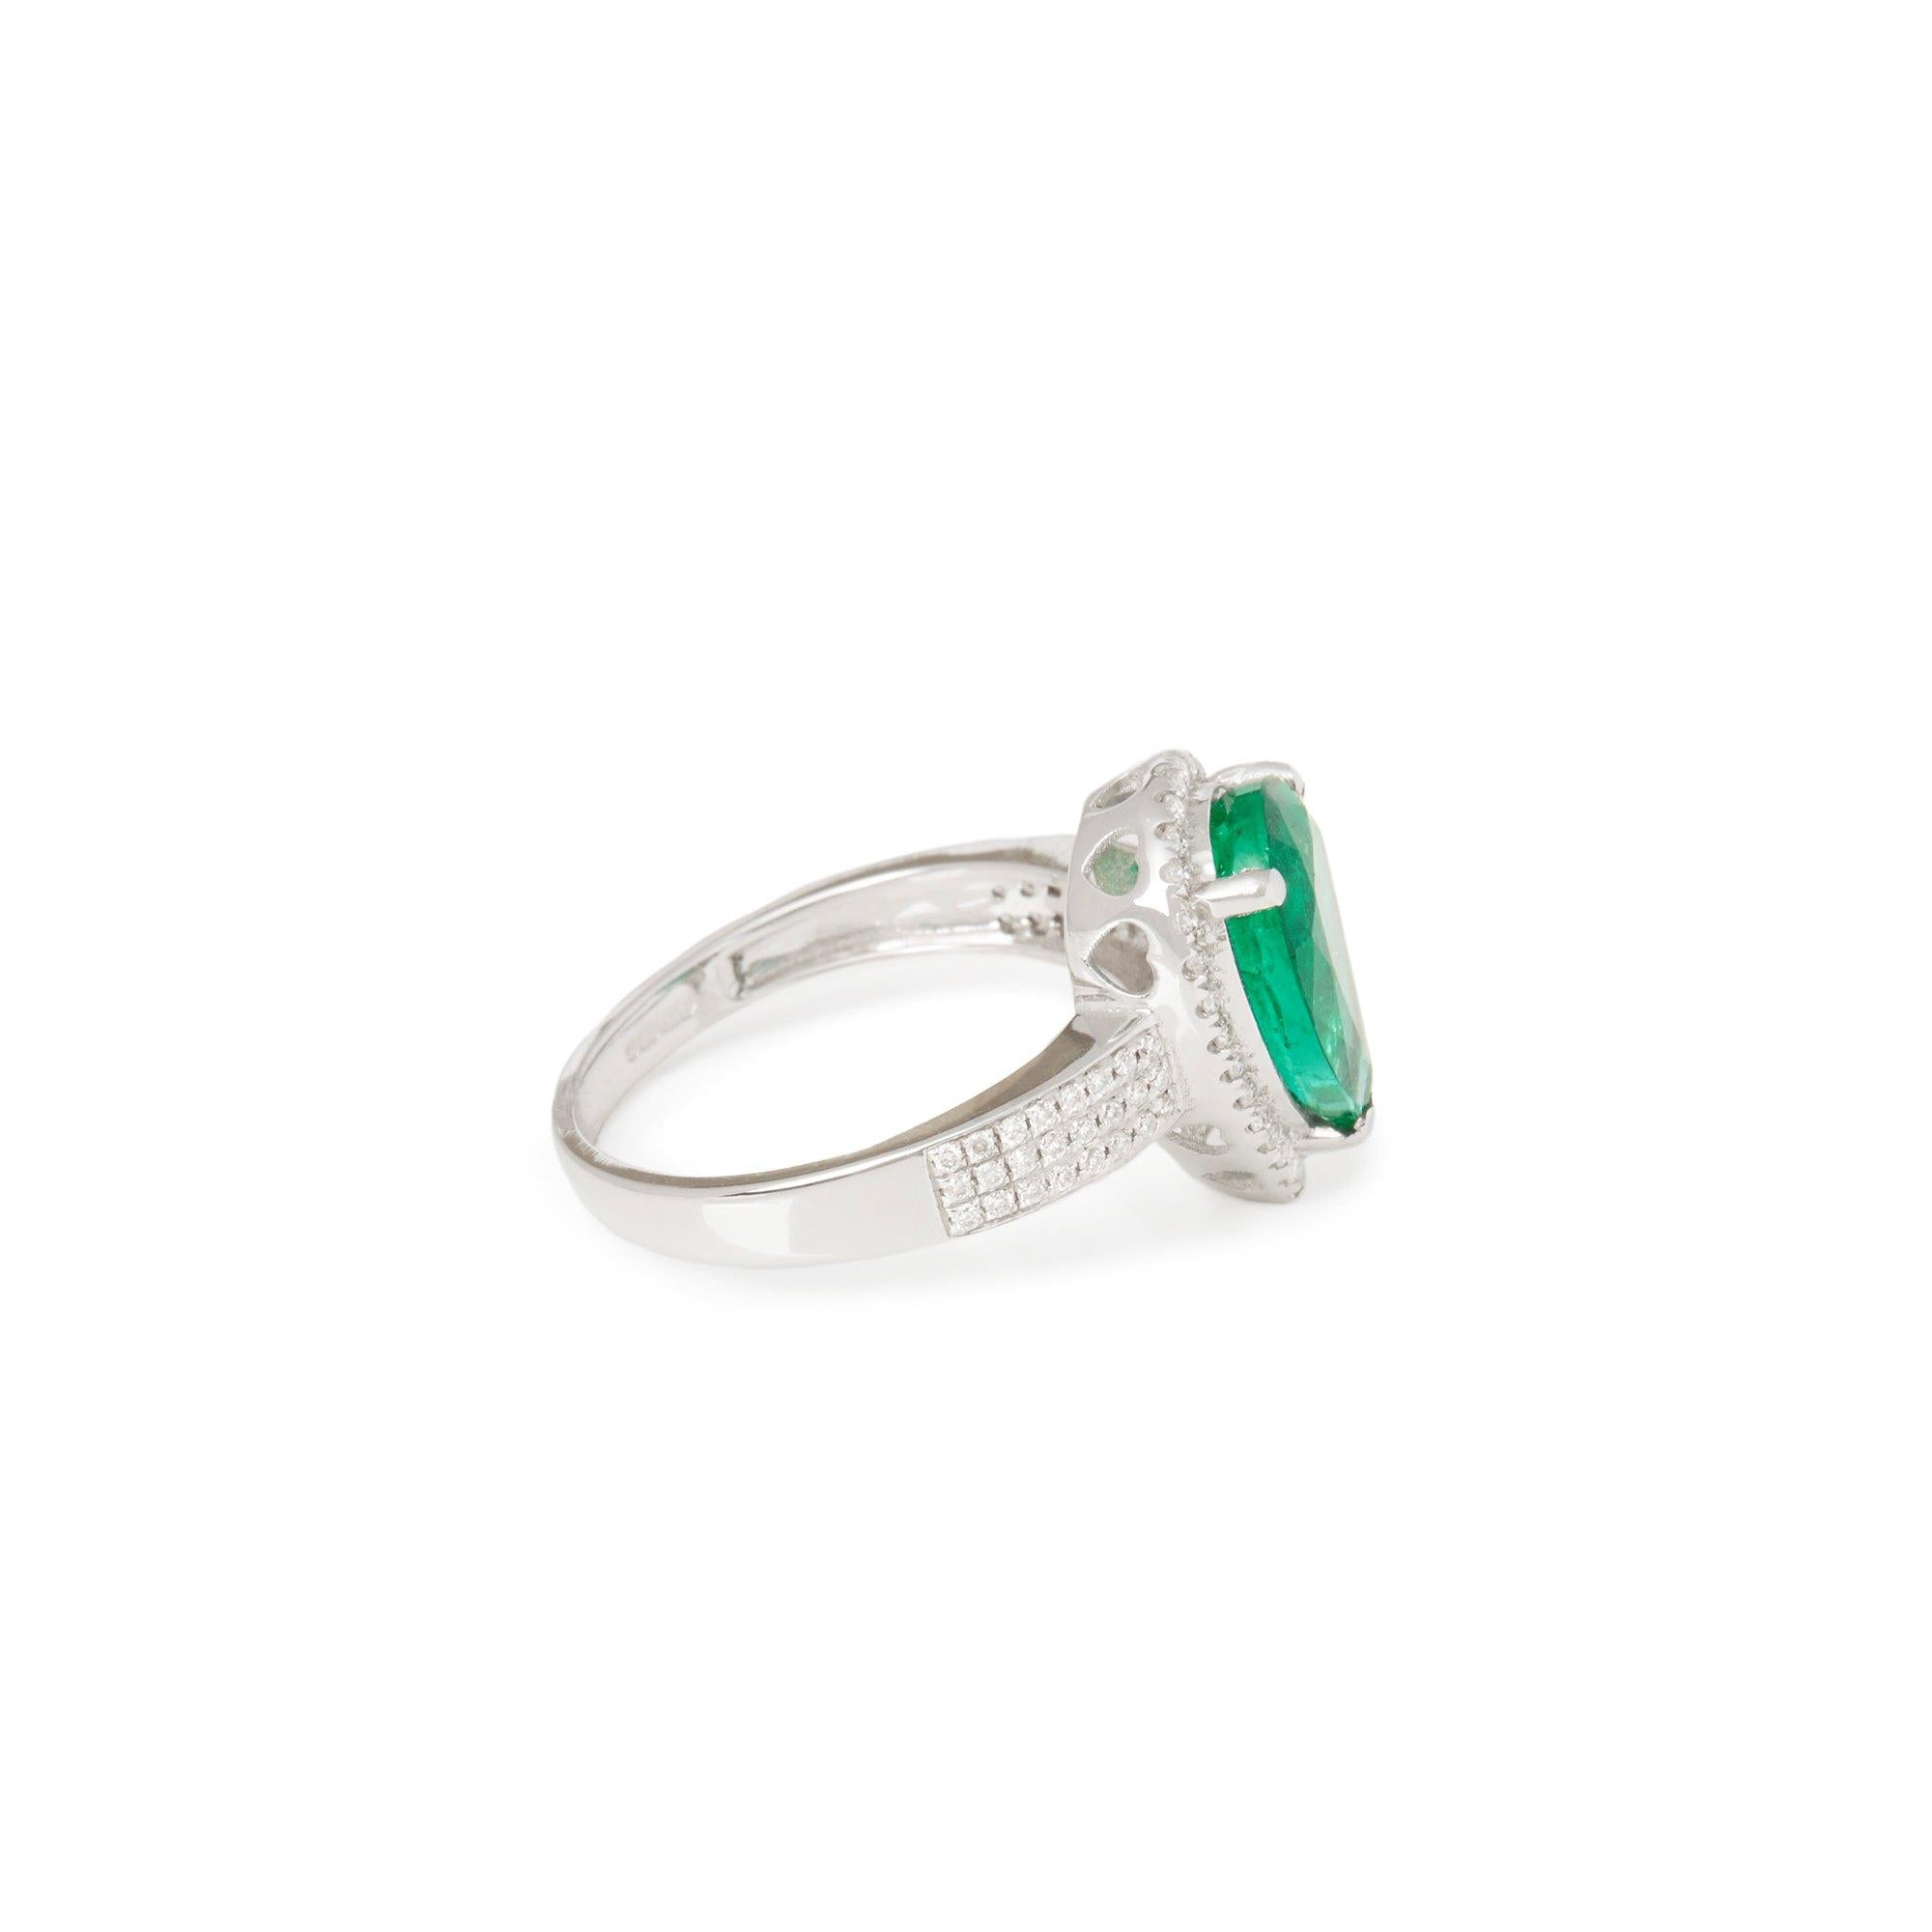 Contemporary Certified 3.66ct Untreated Zambian Pear Cut Emerald and Diamond 18ct Gold Ring For Sale